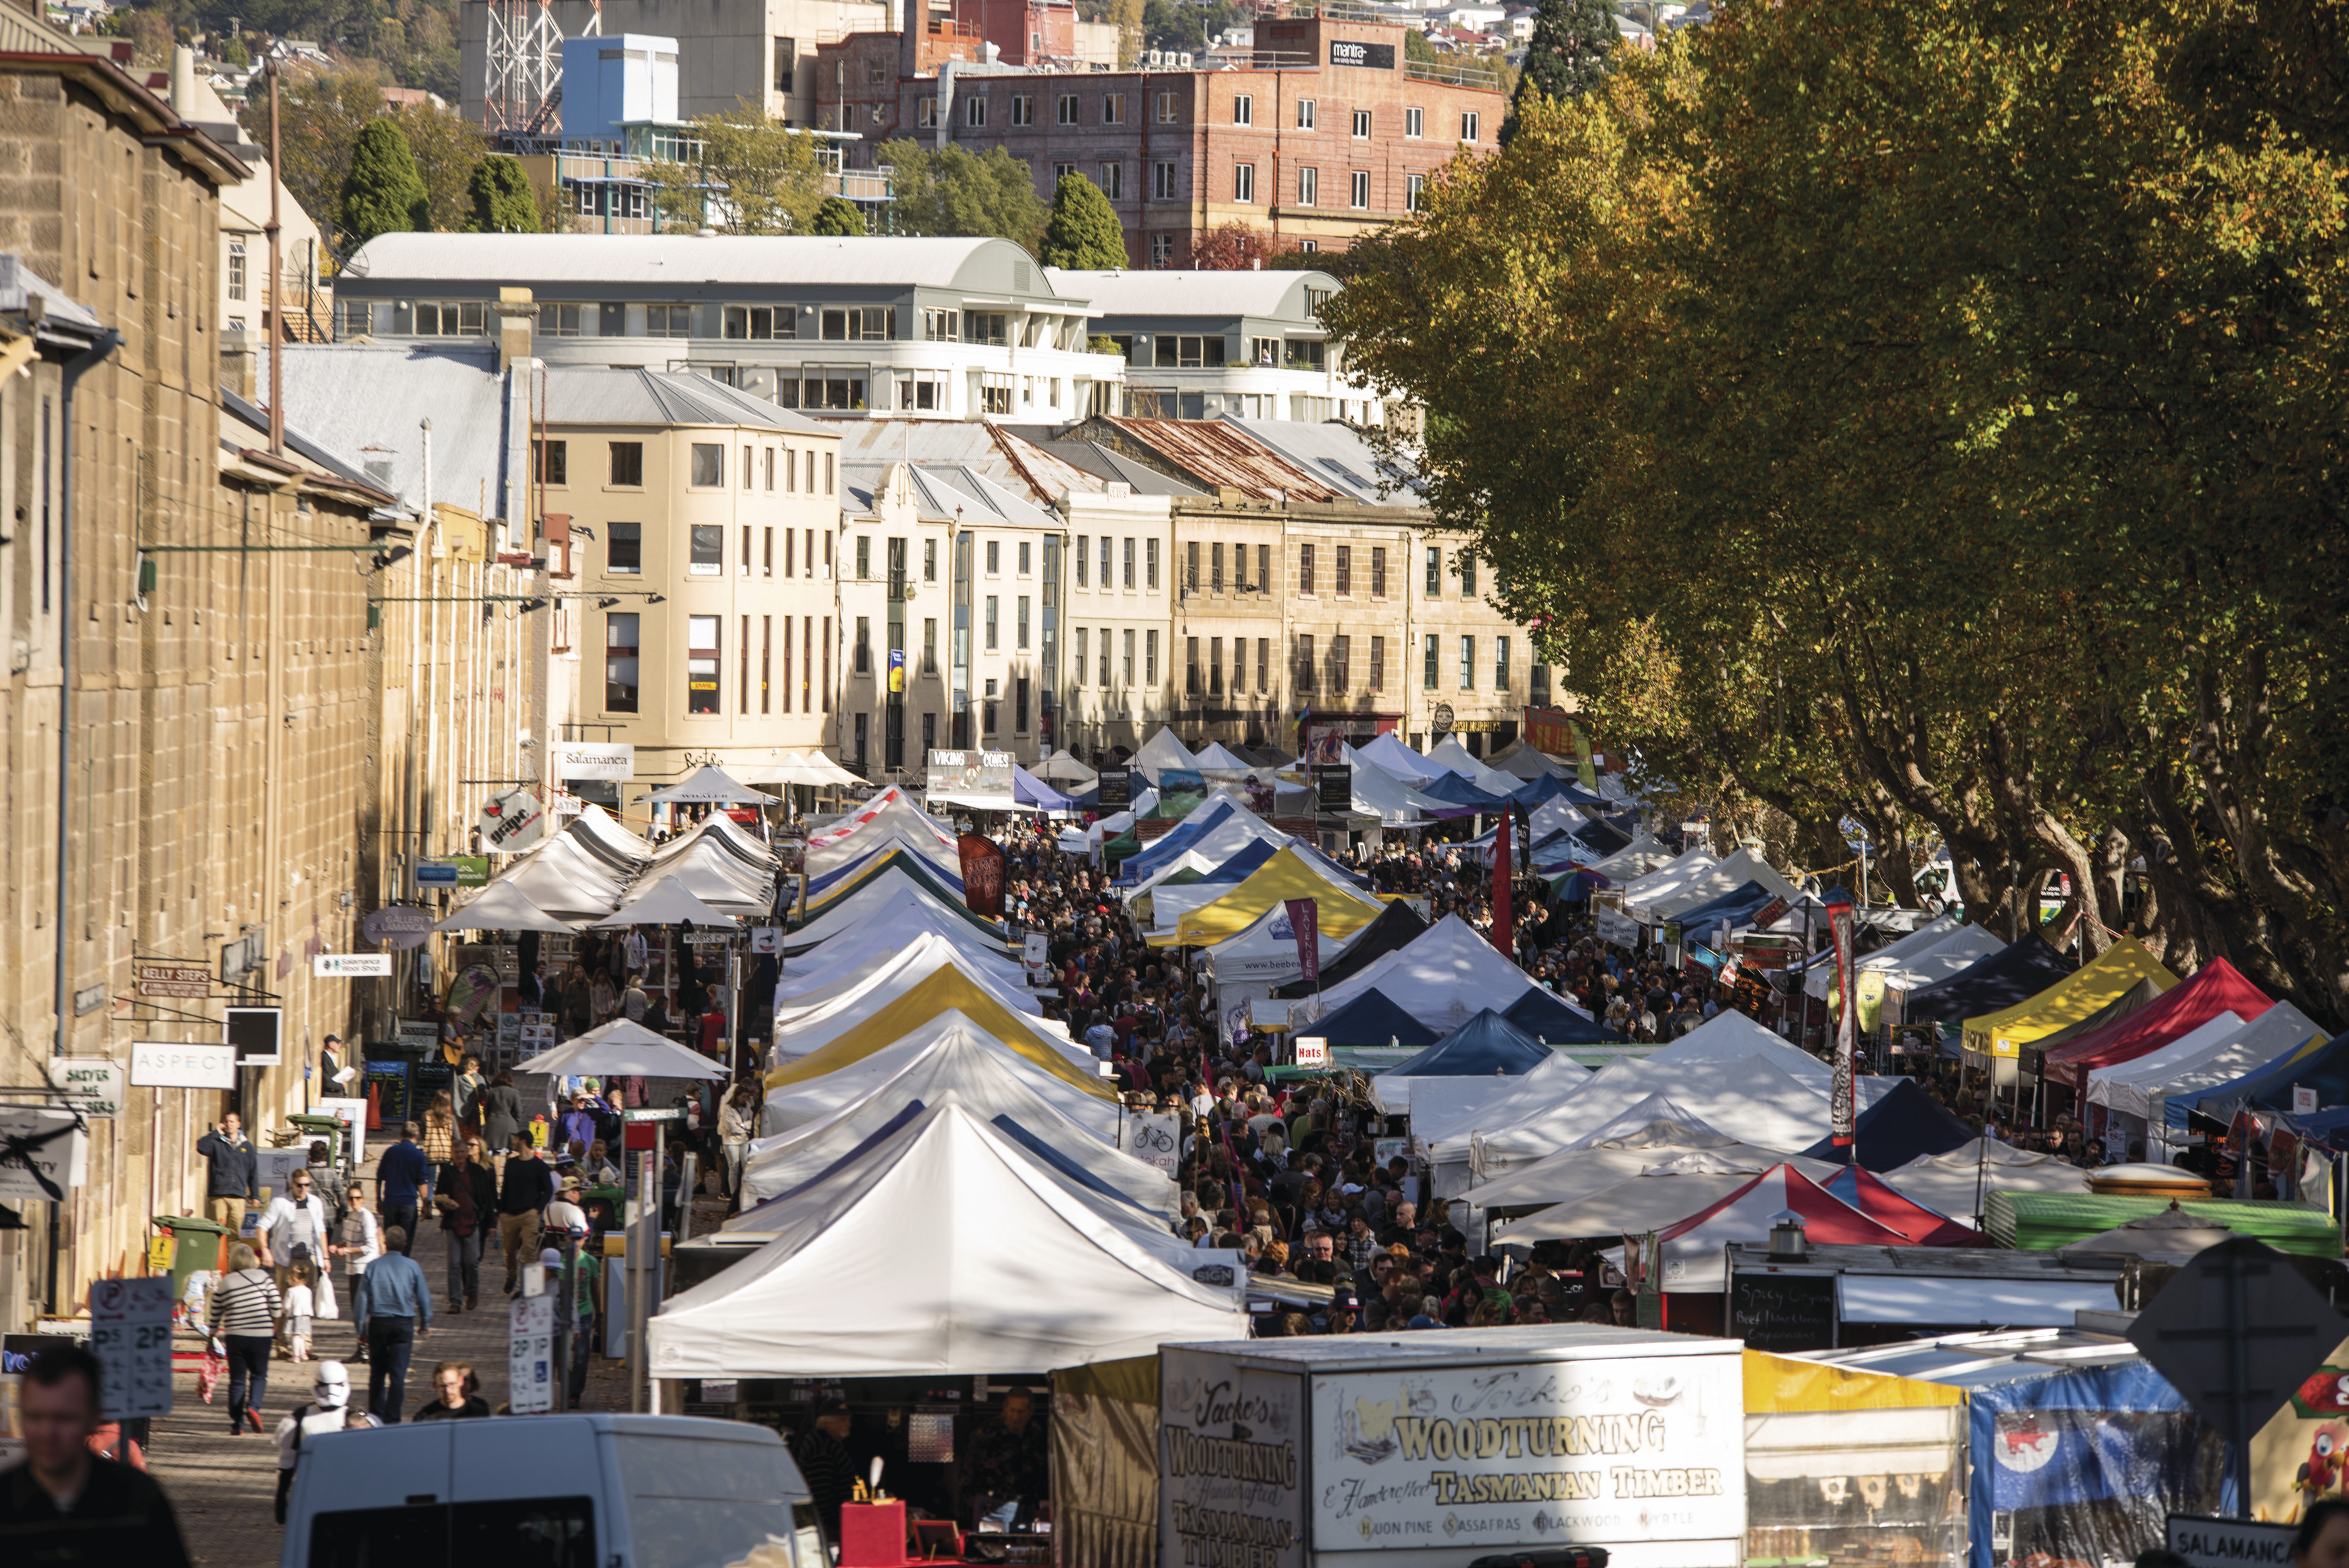 The busy stalls at Salamanca Market. The market is set among the historic Georgian sandstone buildings of Salamanca Place in Hobart.